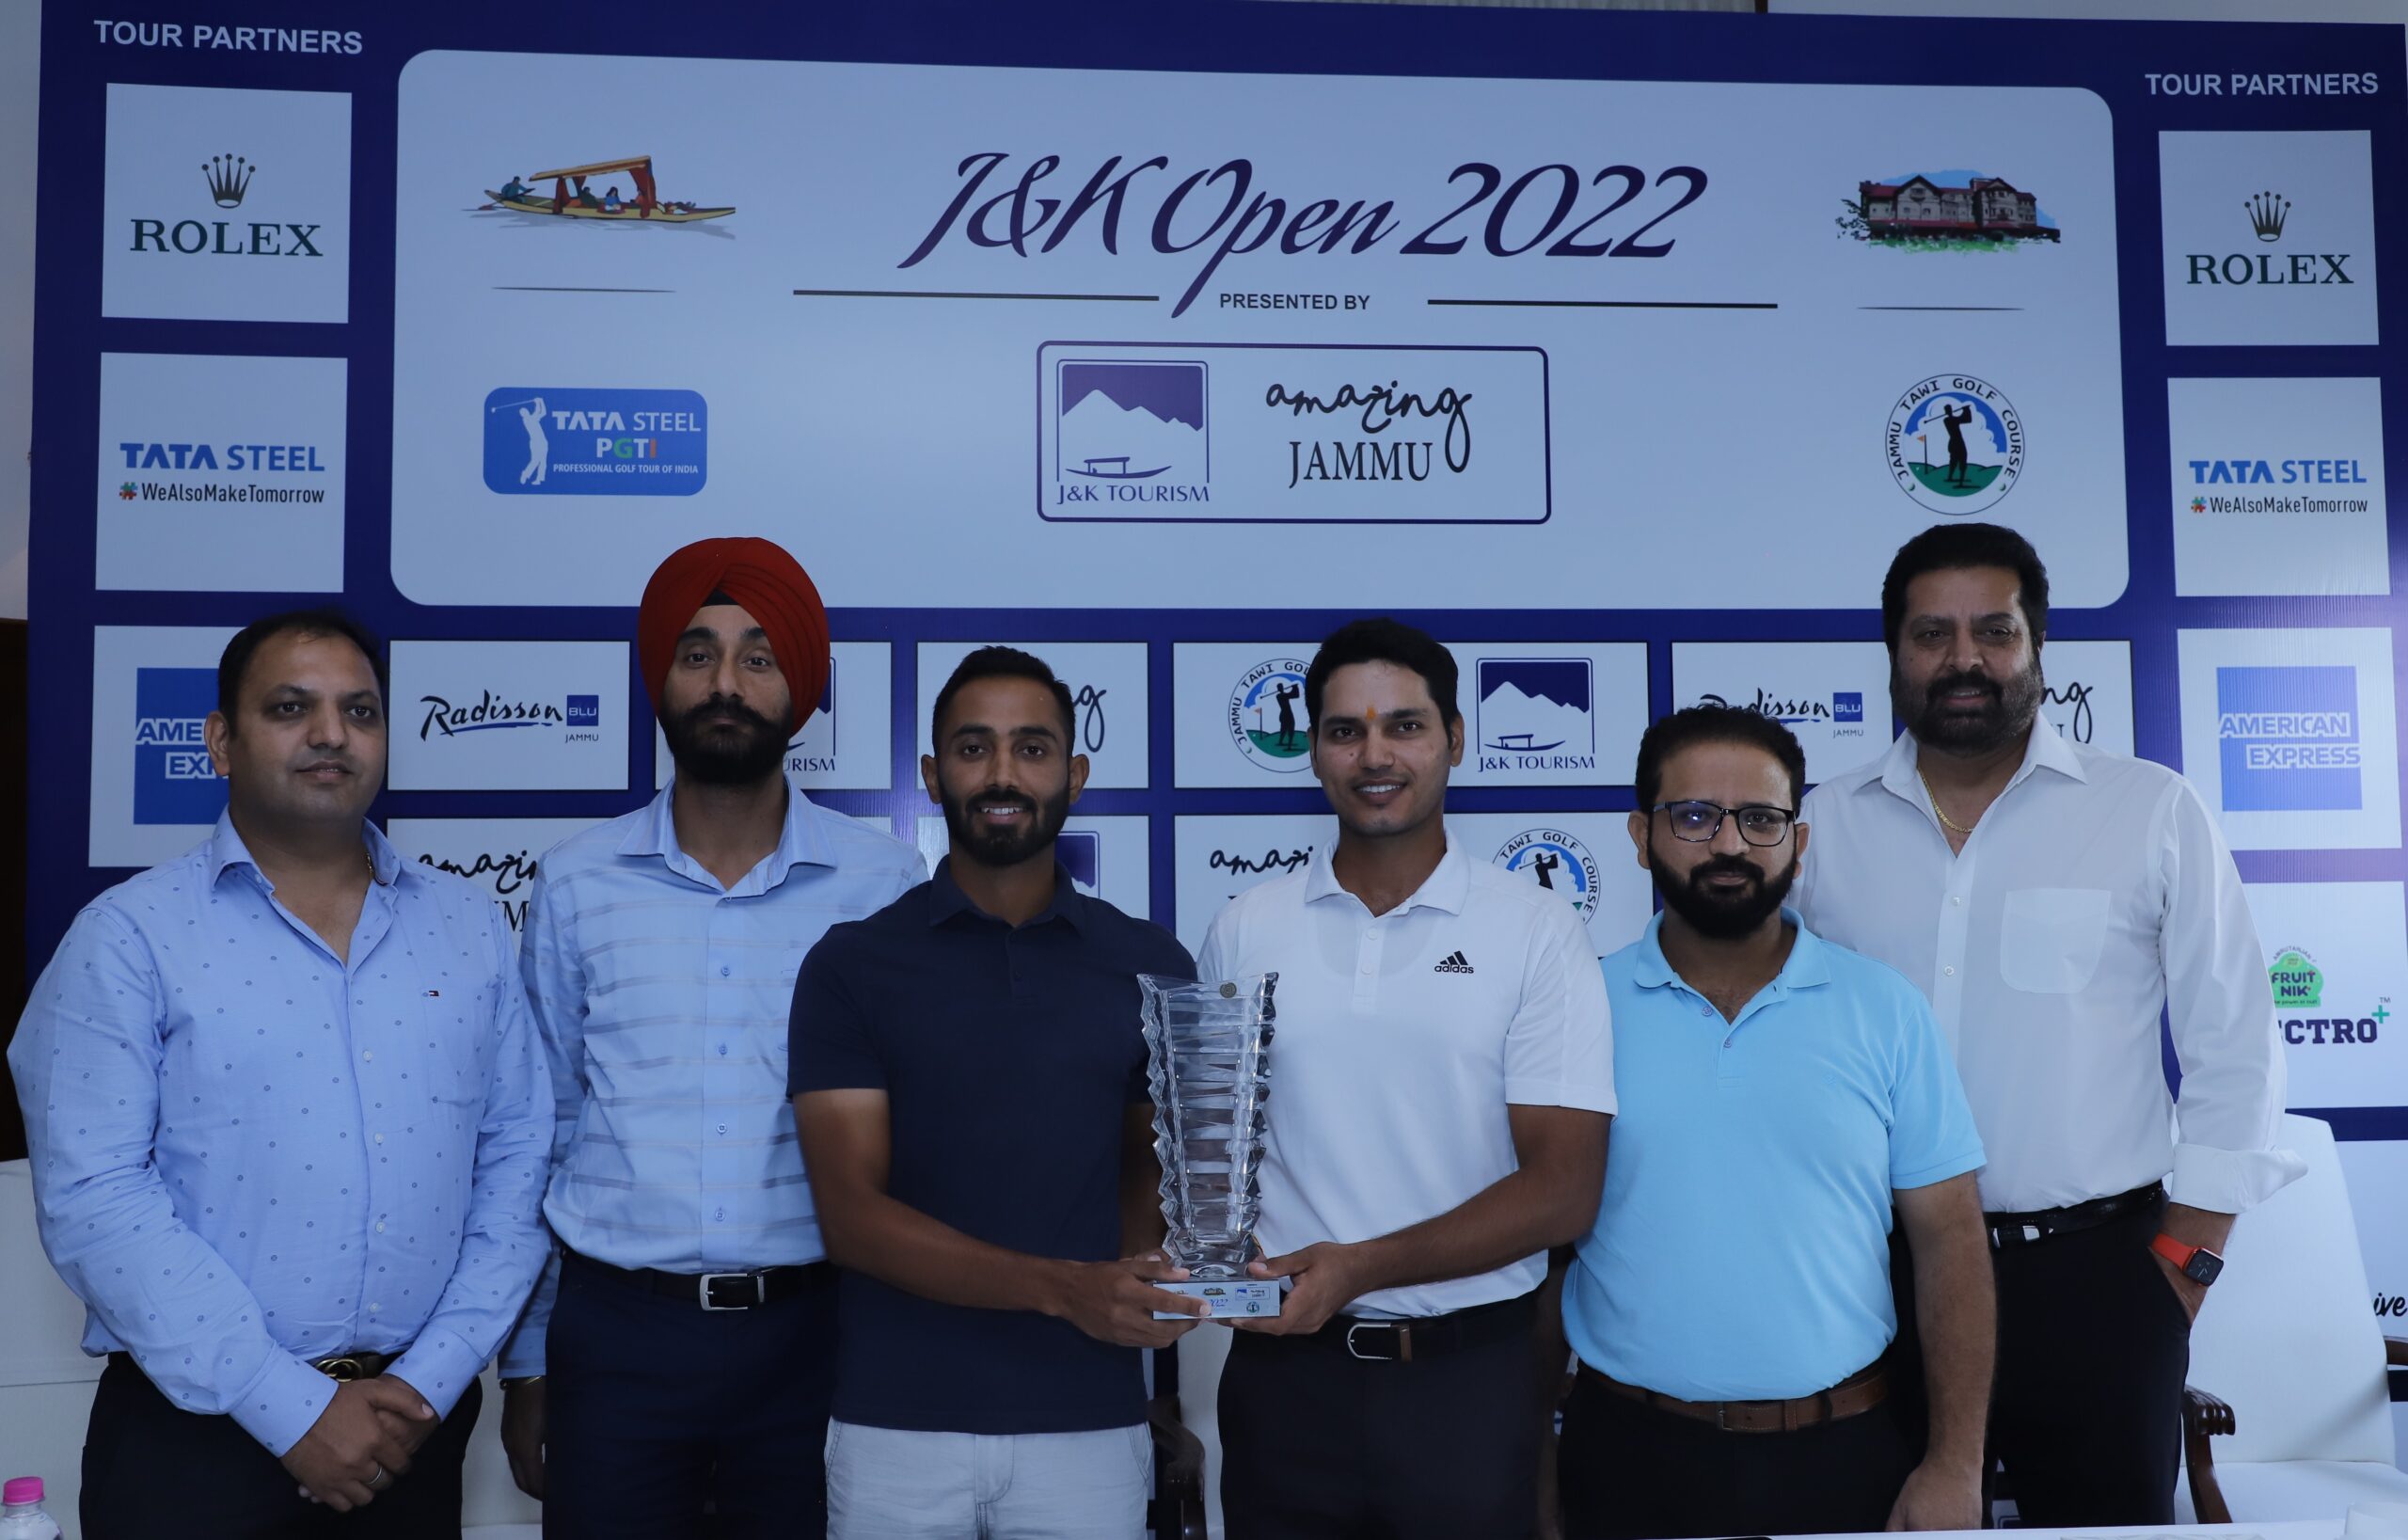  Professional golf makes debut in Jammu with PGTI’s J&K Open 2022 presented by J&K Tourism